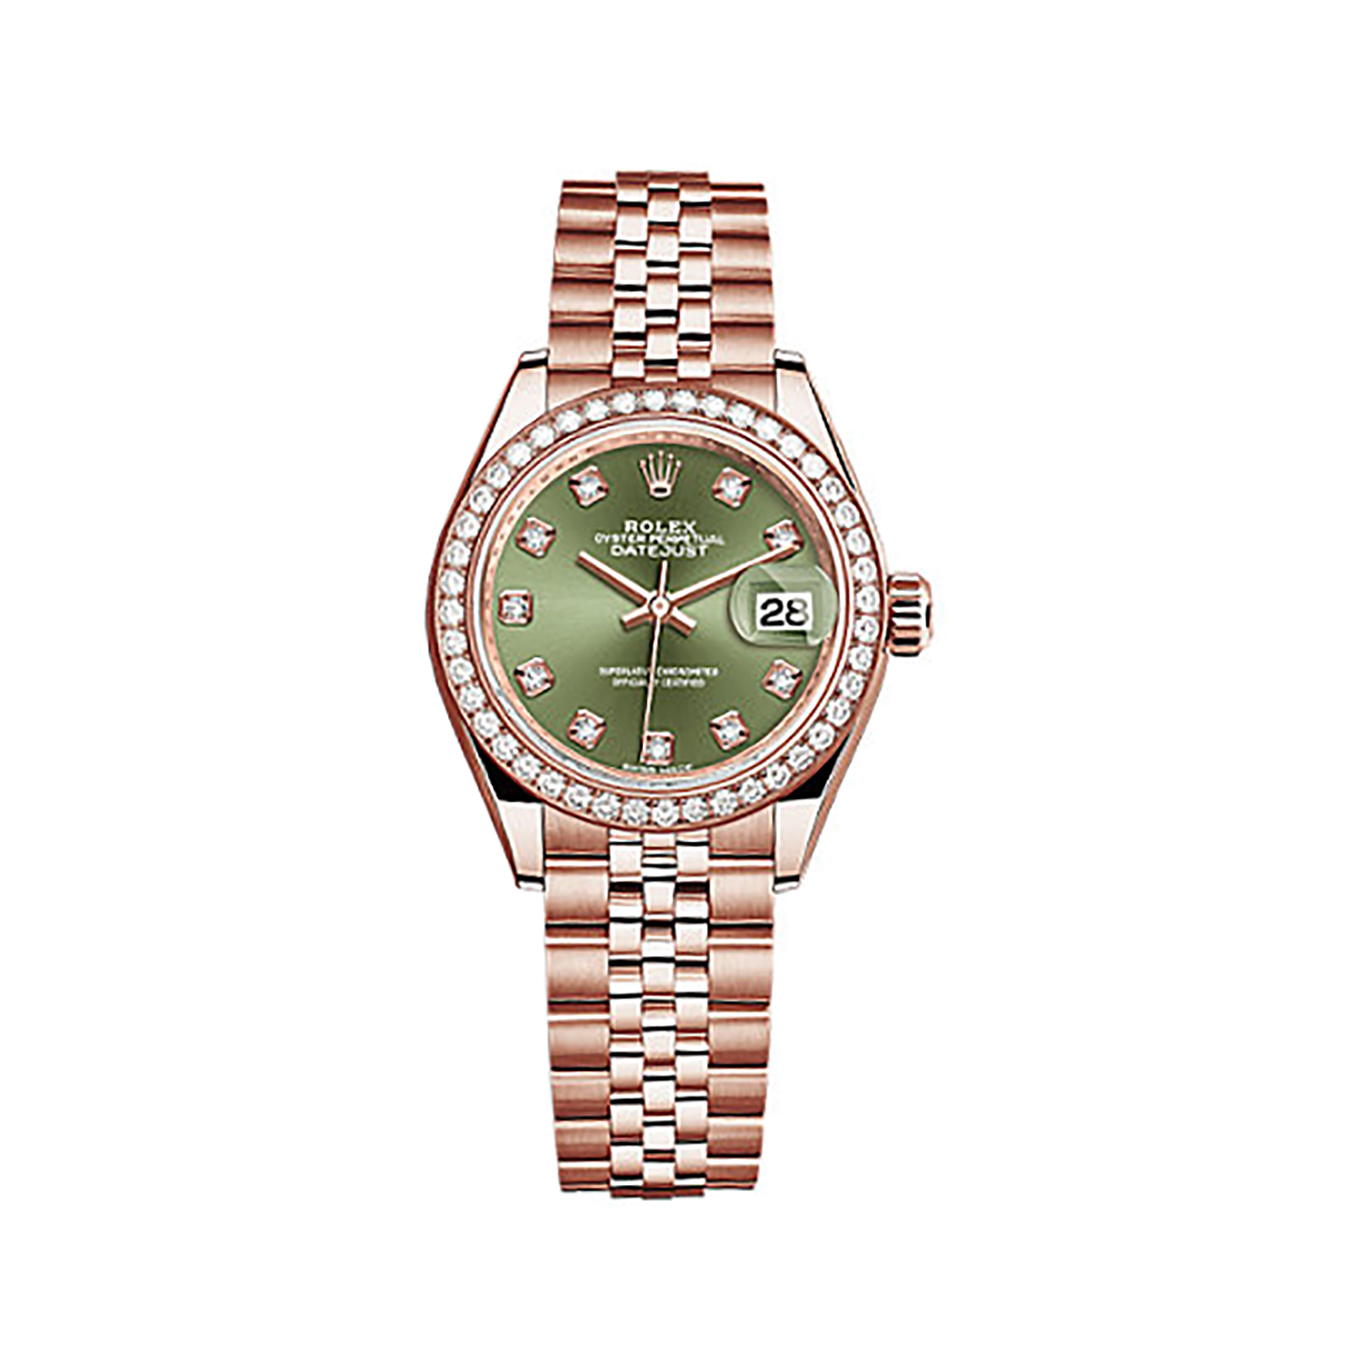 Lady-Datejust 28 279135RBR Rose Gold & Diamonds Watch (Olive Green Set with Diamonds) - Click Image to Close